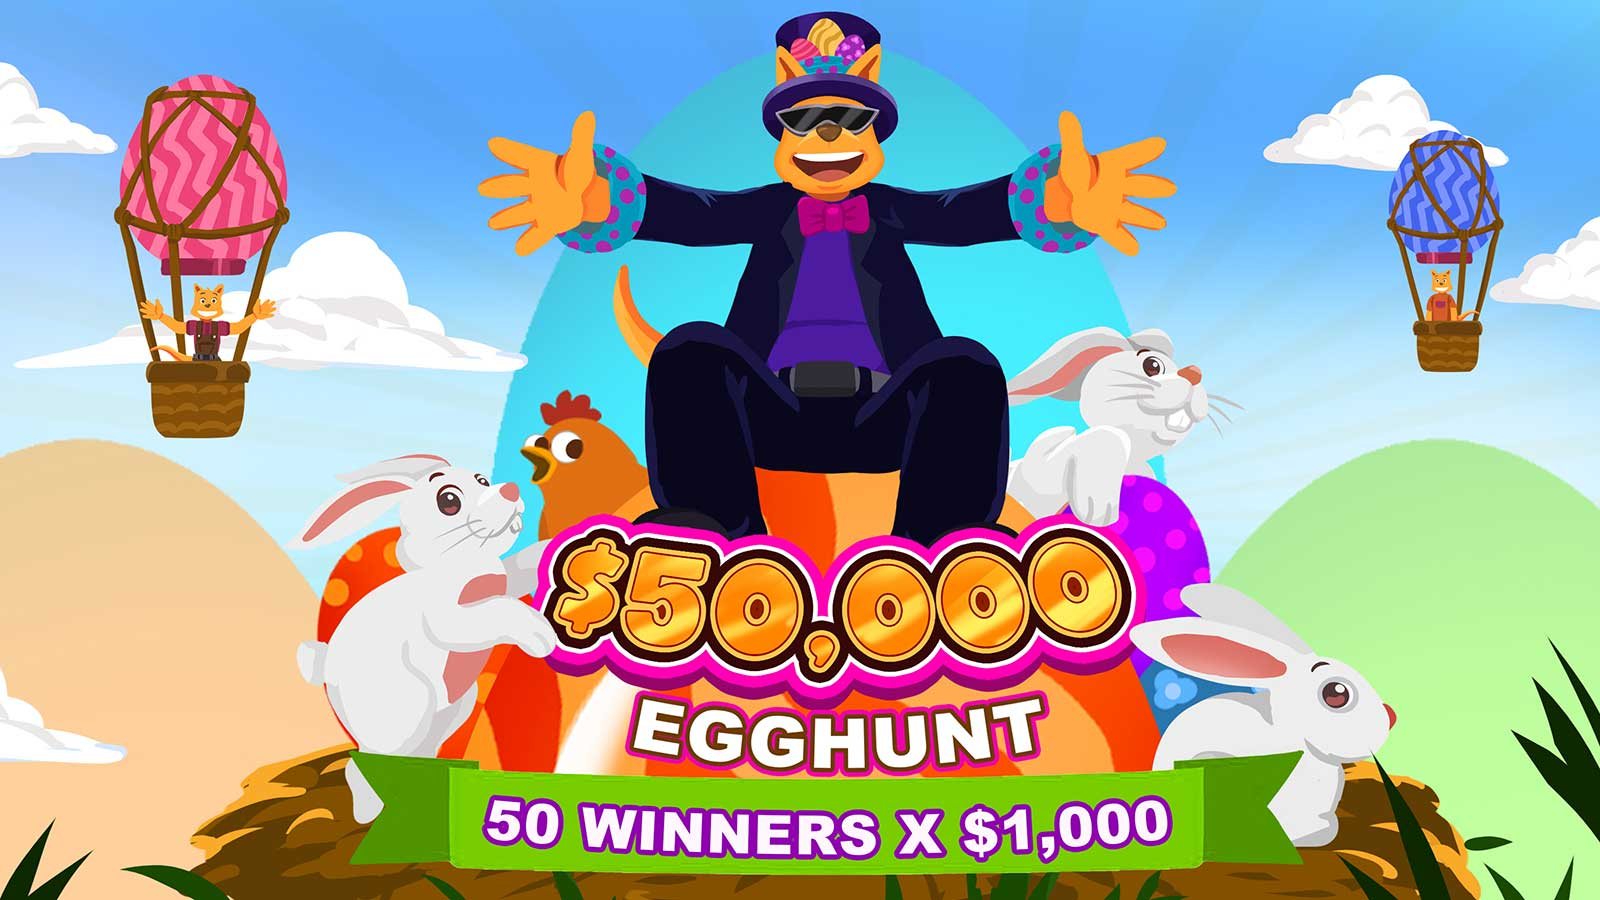 Easter Roo's on the loose with $50,000